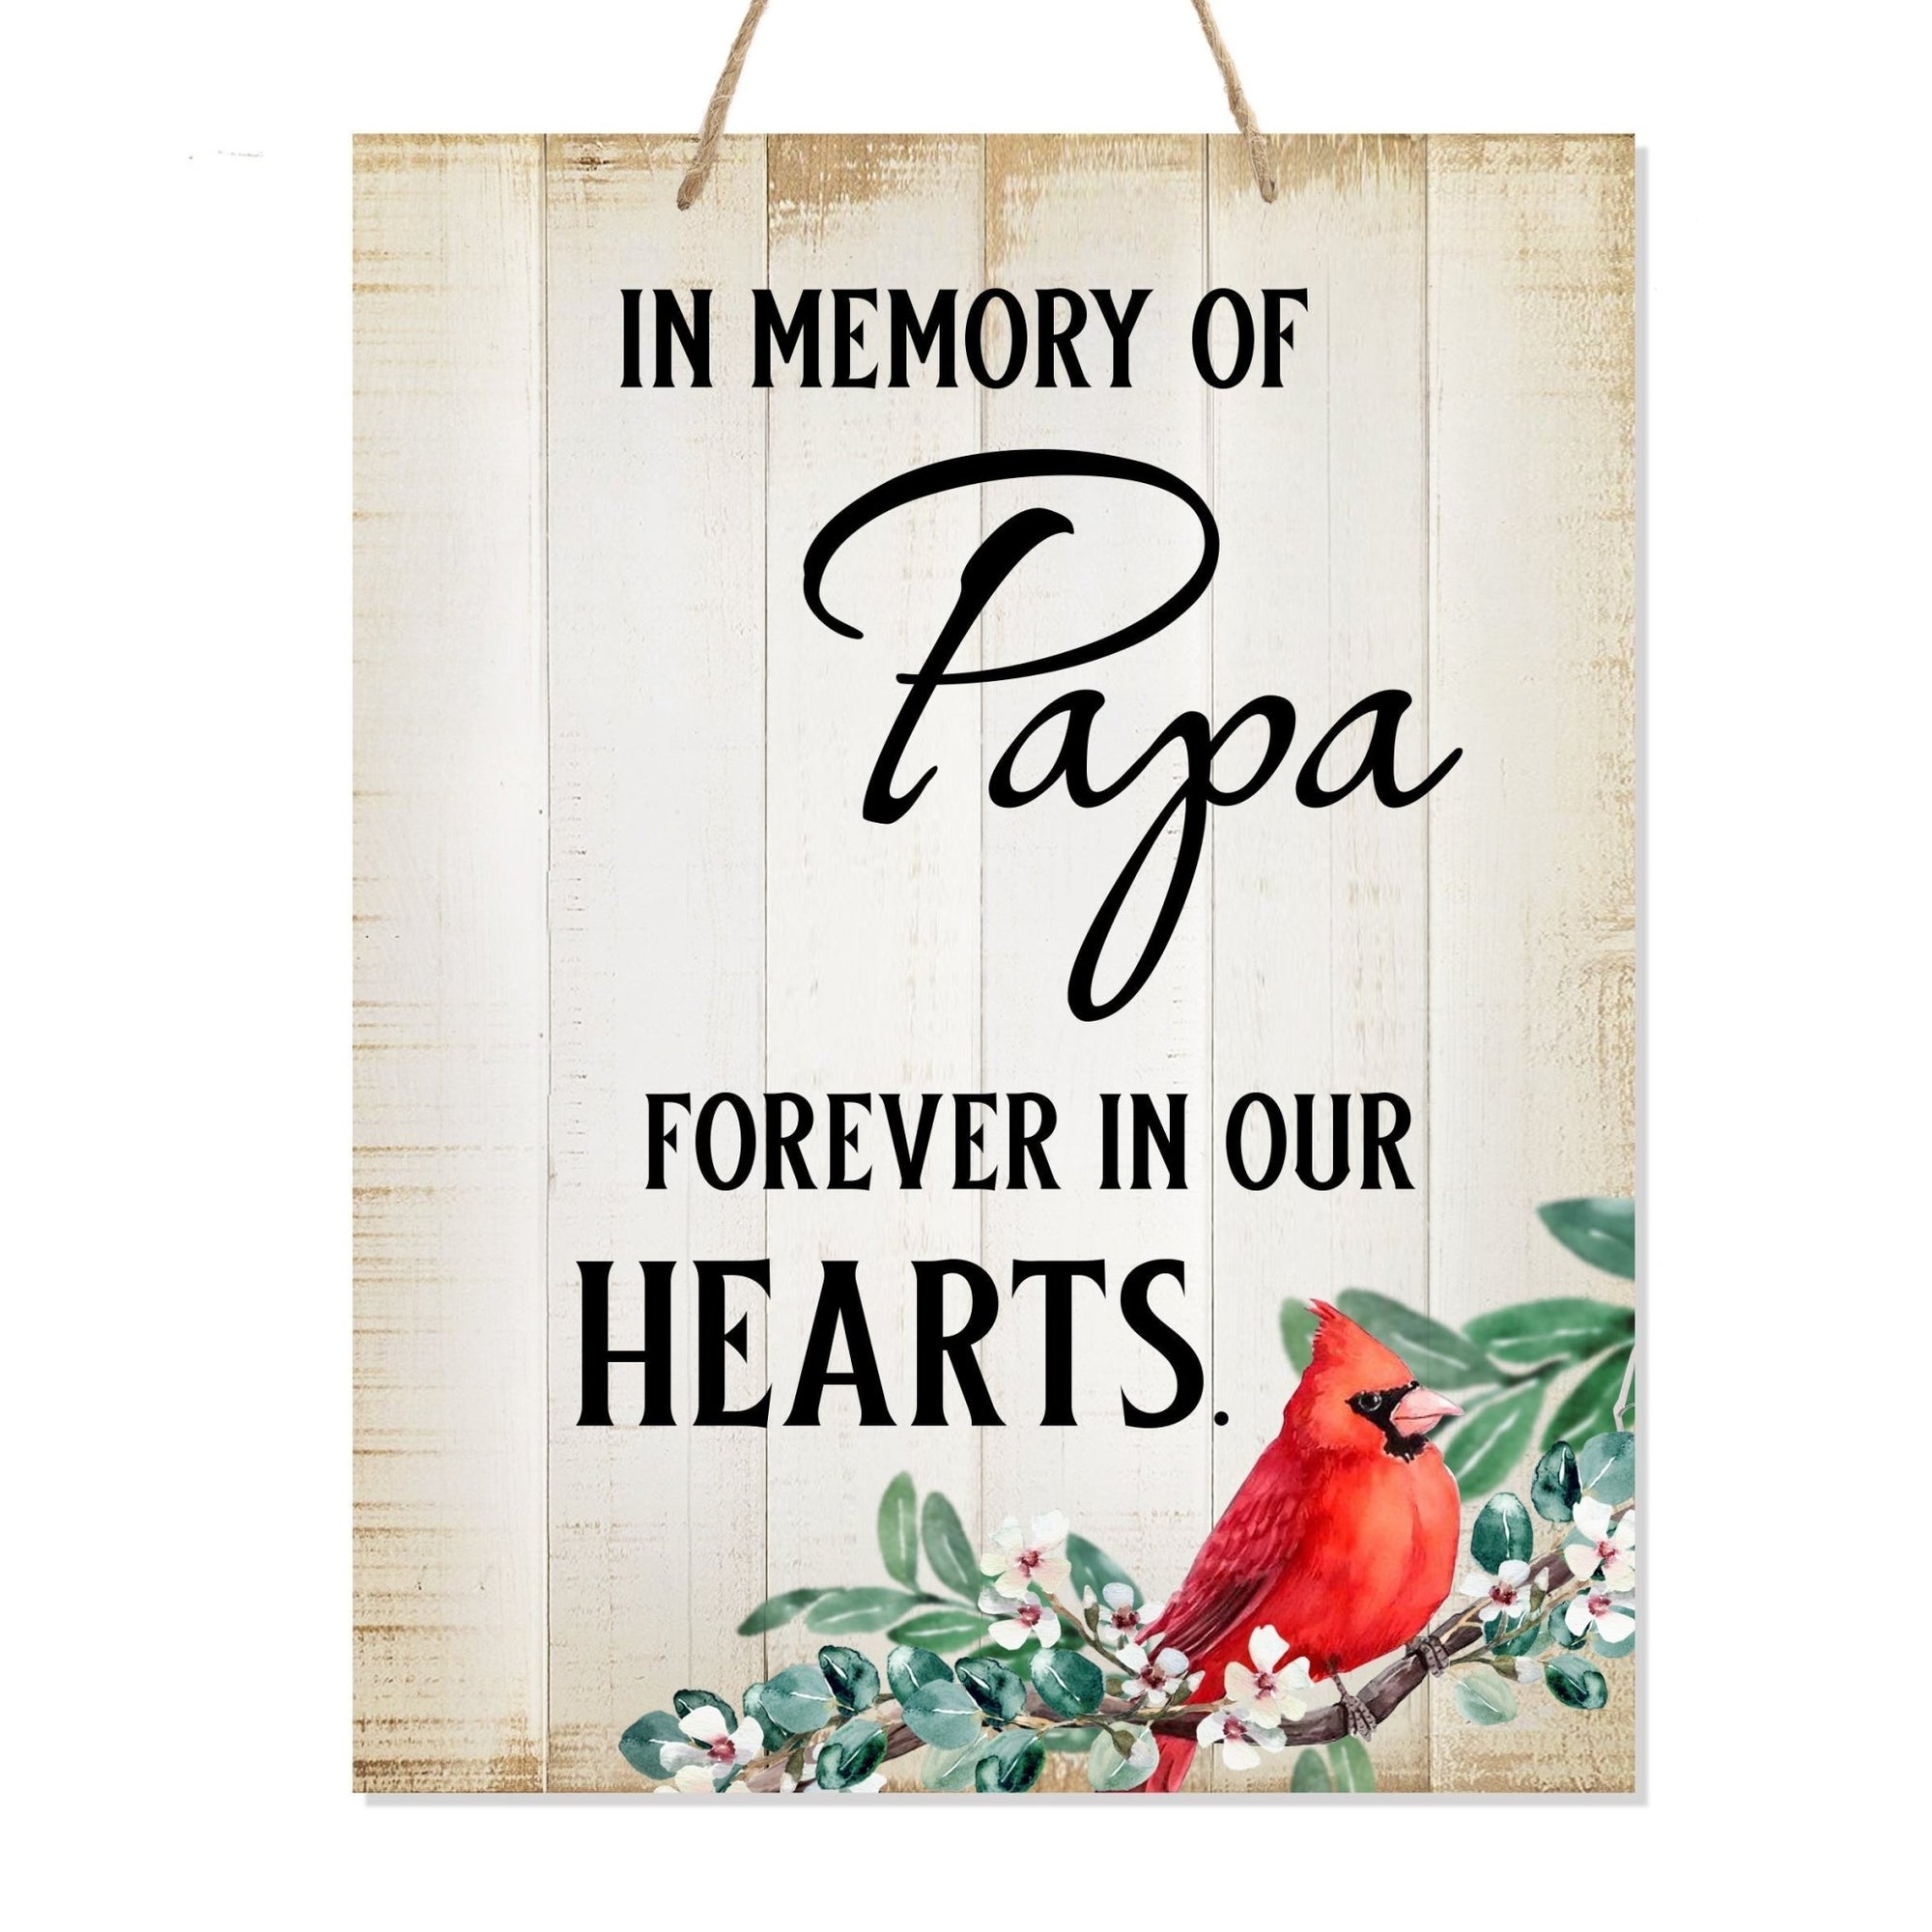 Handcrafted wooden memorial ribbon sign with a touching message, a meaningful way to remember loved ones and honor their memory.